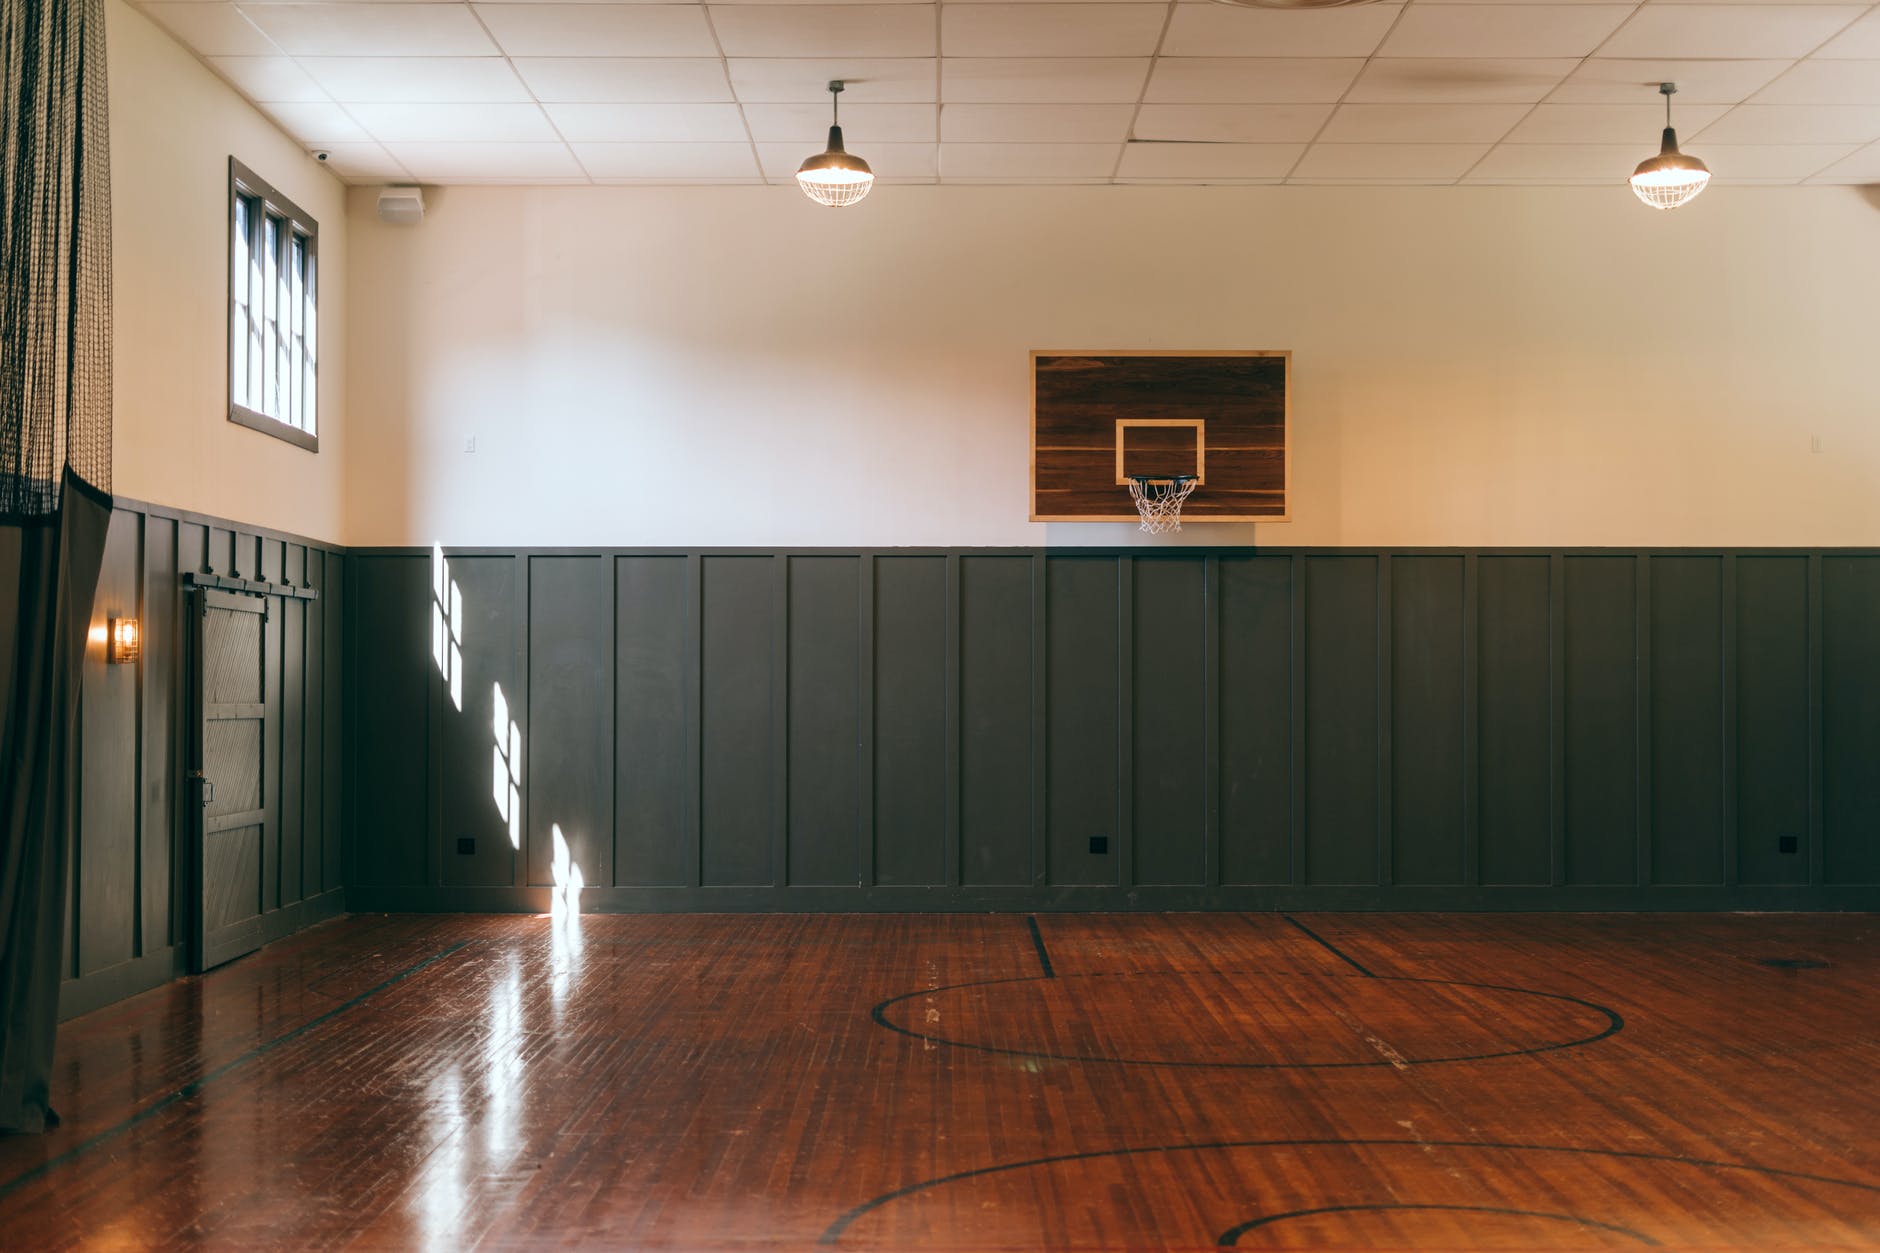 interior of indoors basketball court in sports center